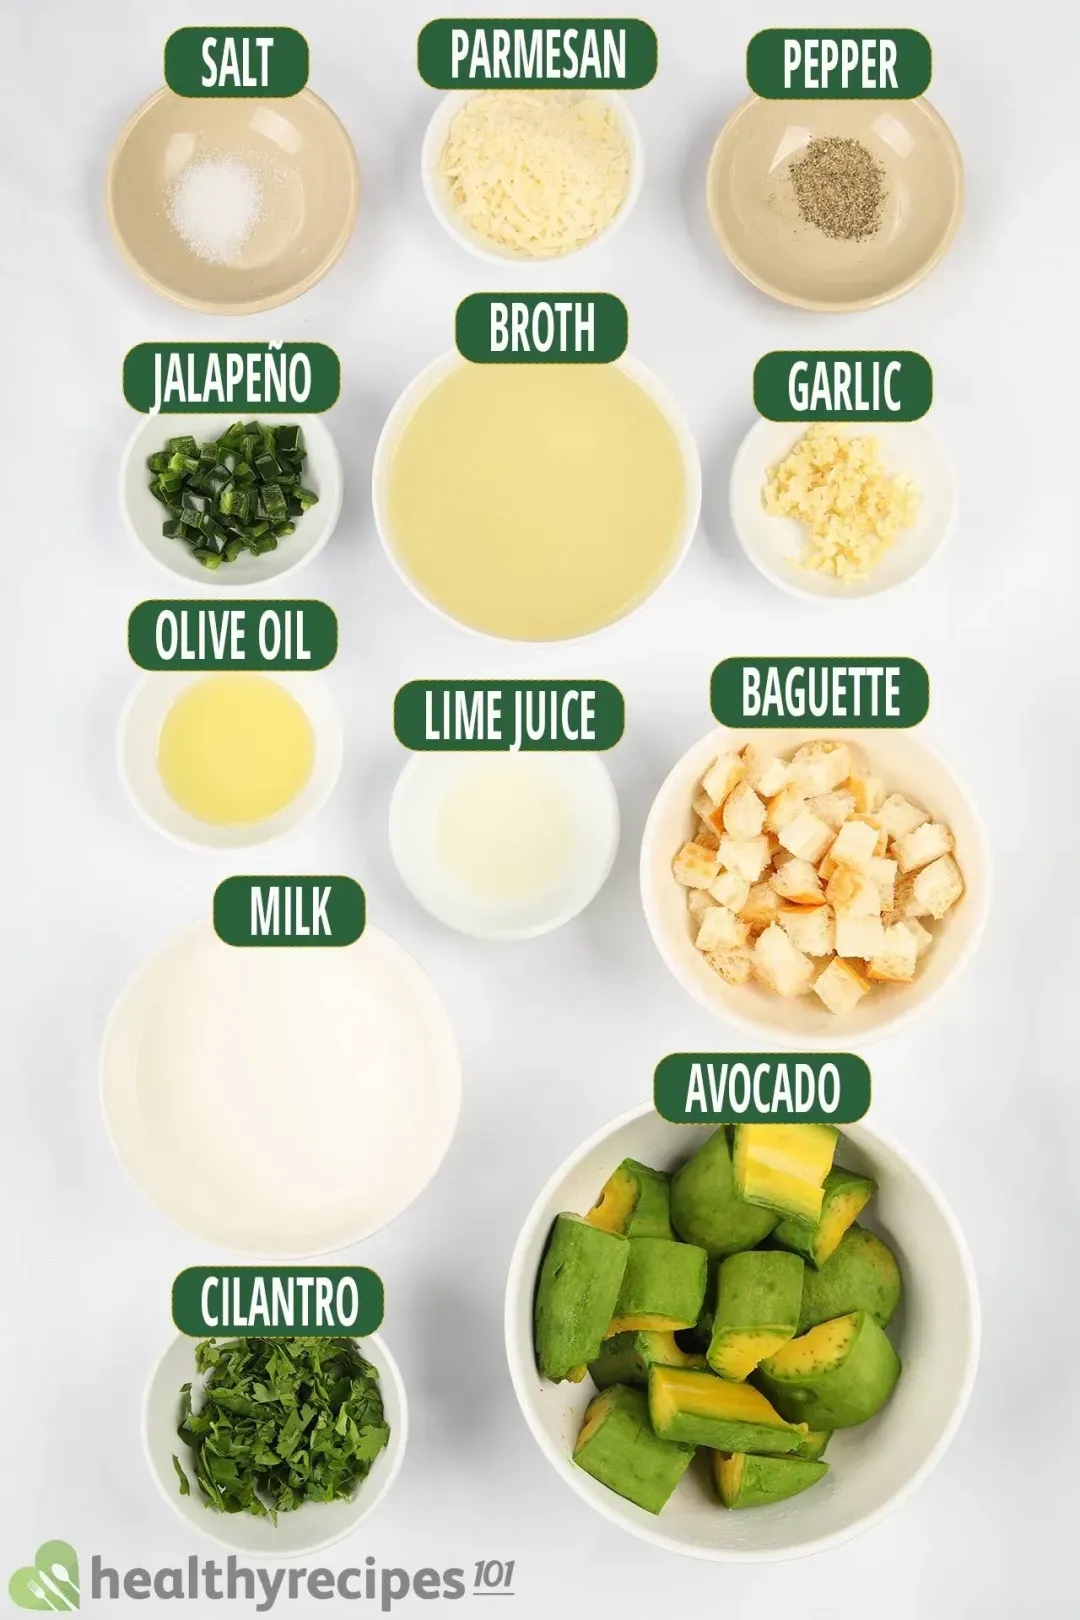 Ingredients for Avocado Soup